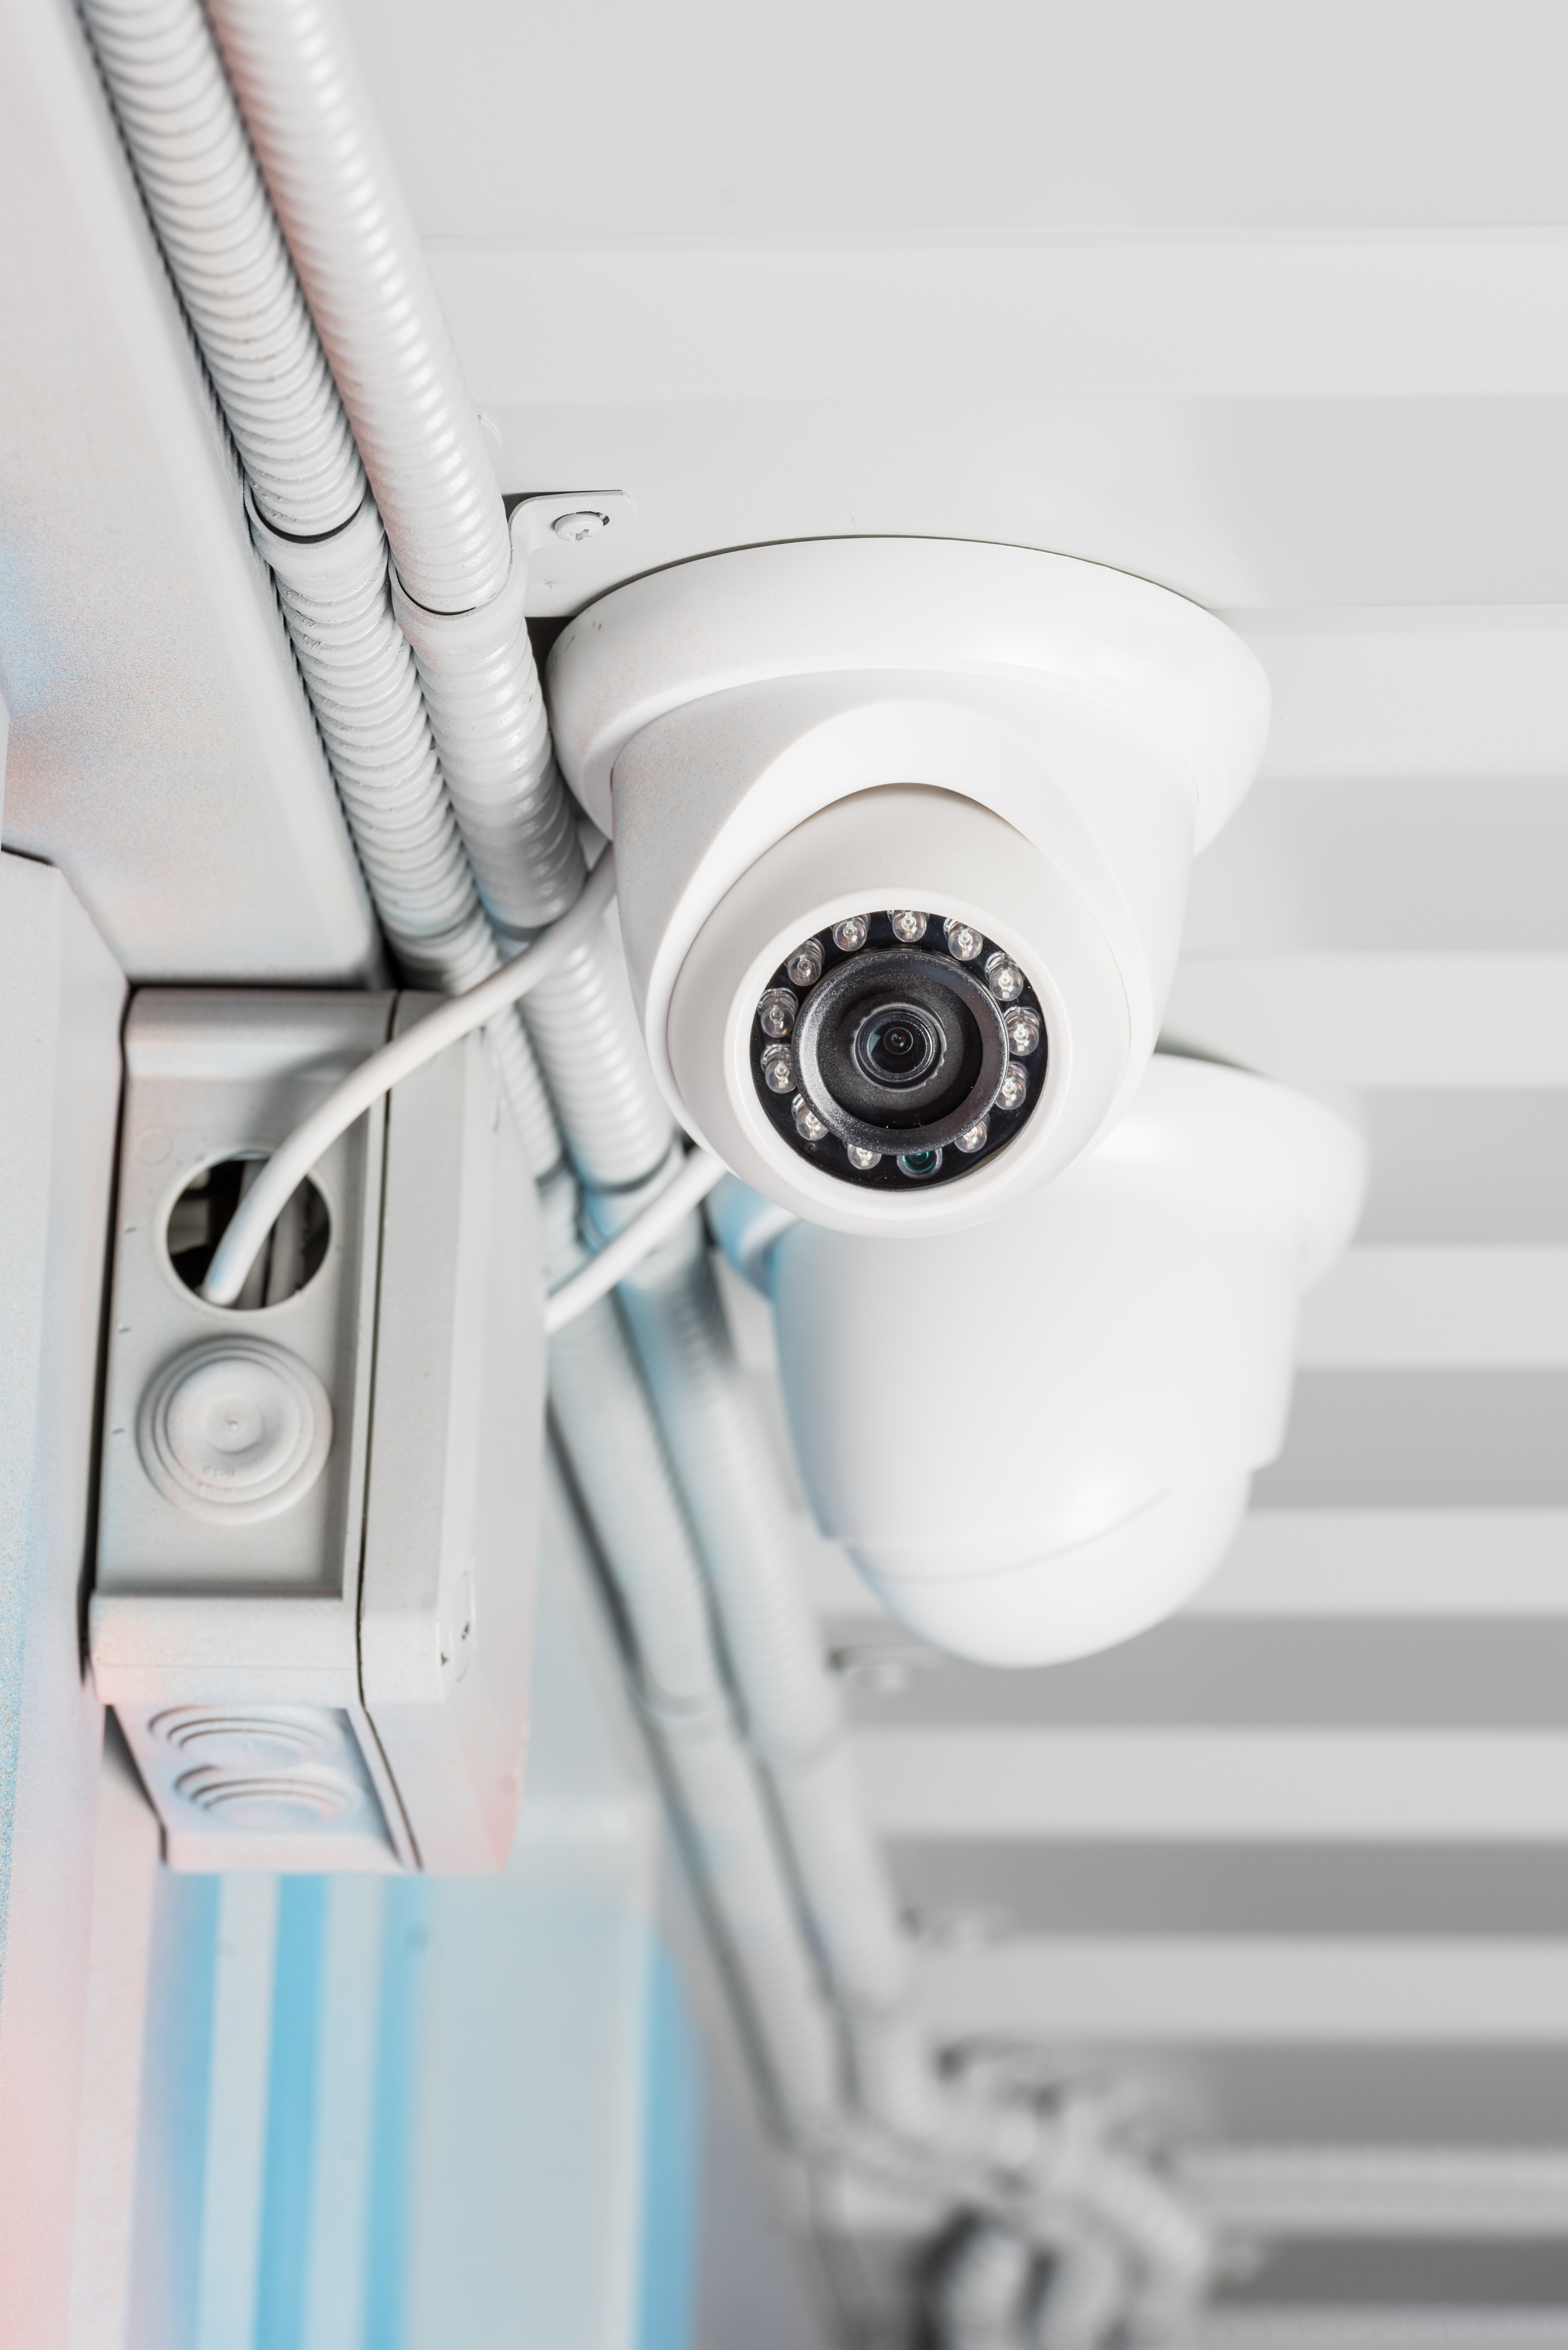 Top Security Systems in Iona Idaho - Protect Your Property Today!